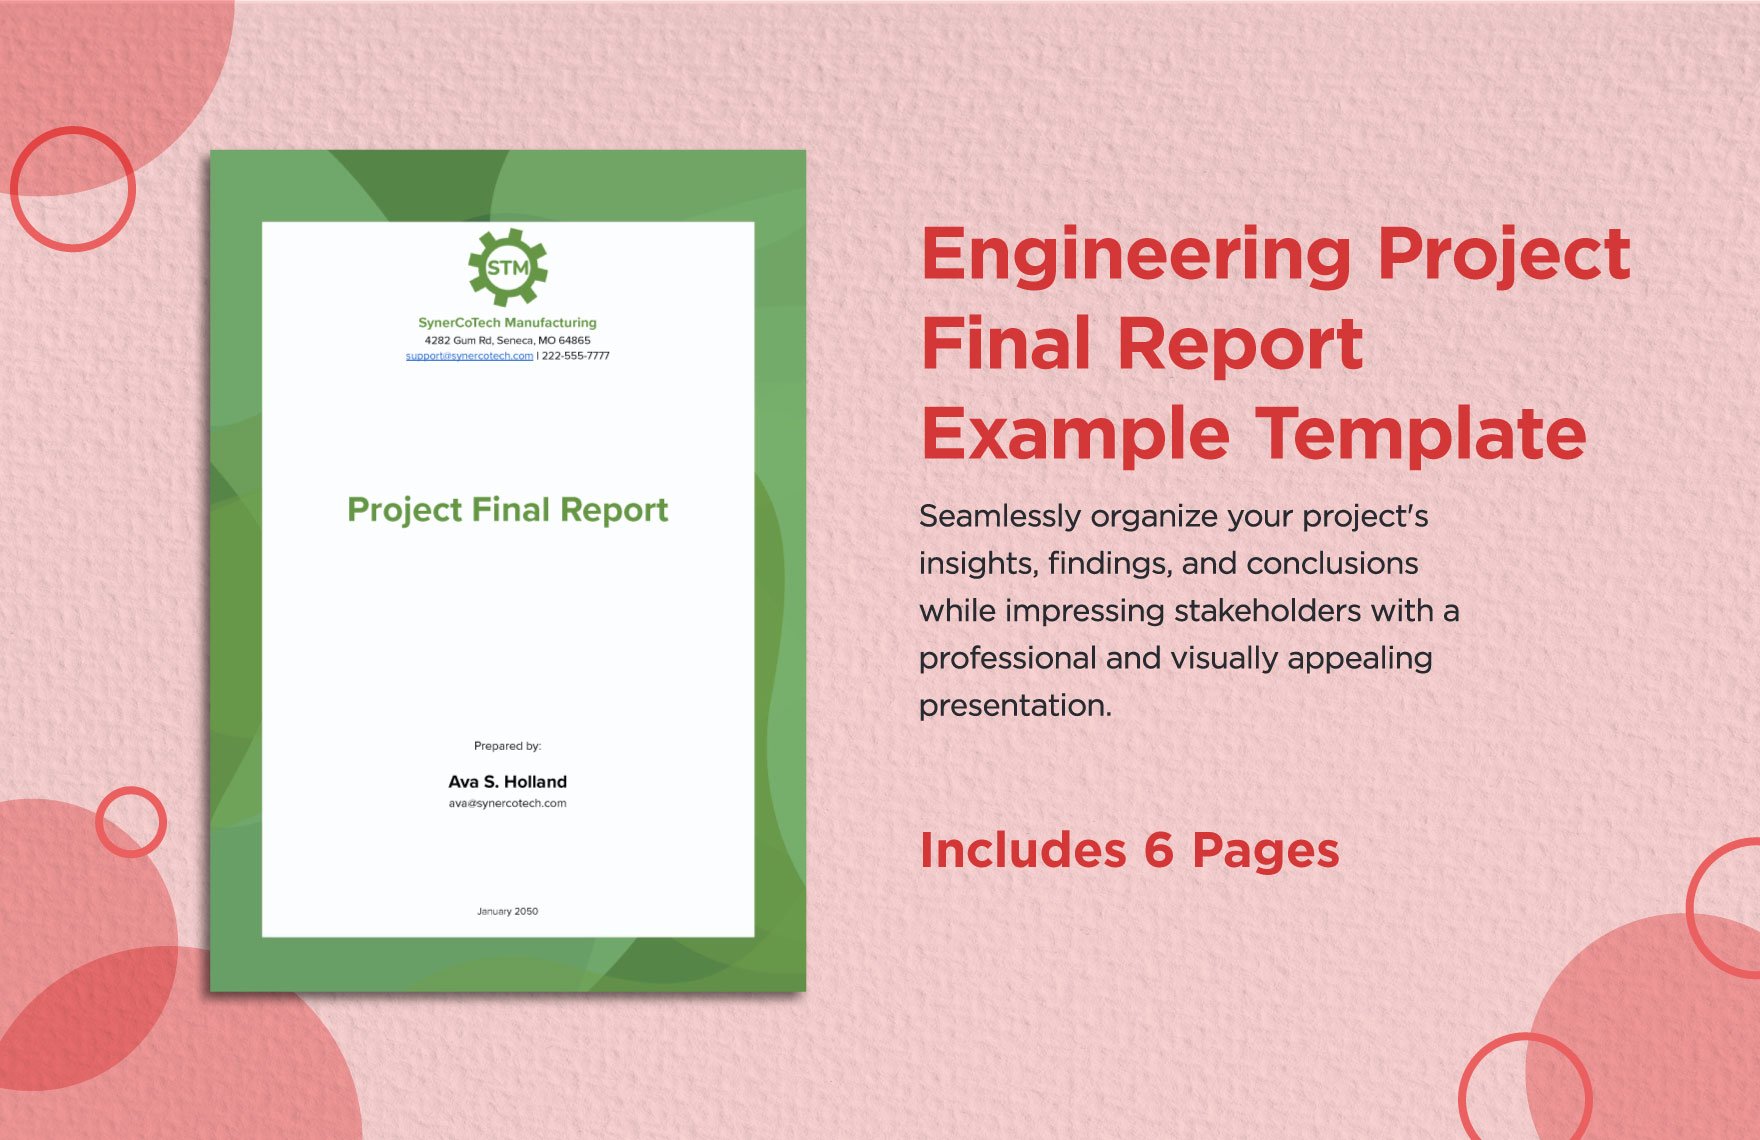 engineering-project-final-report-example